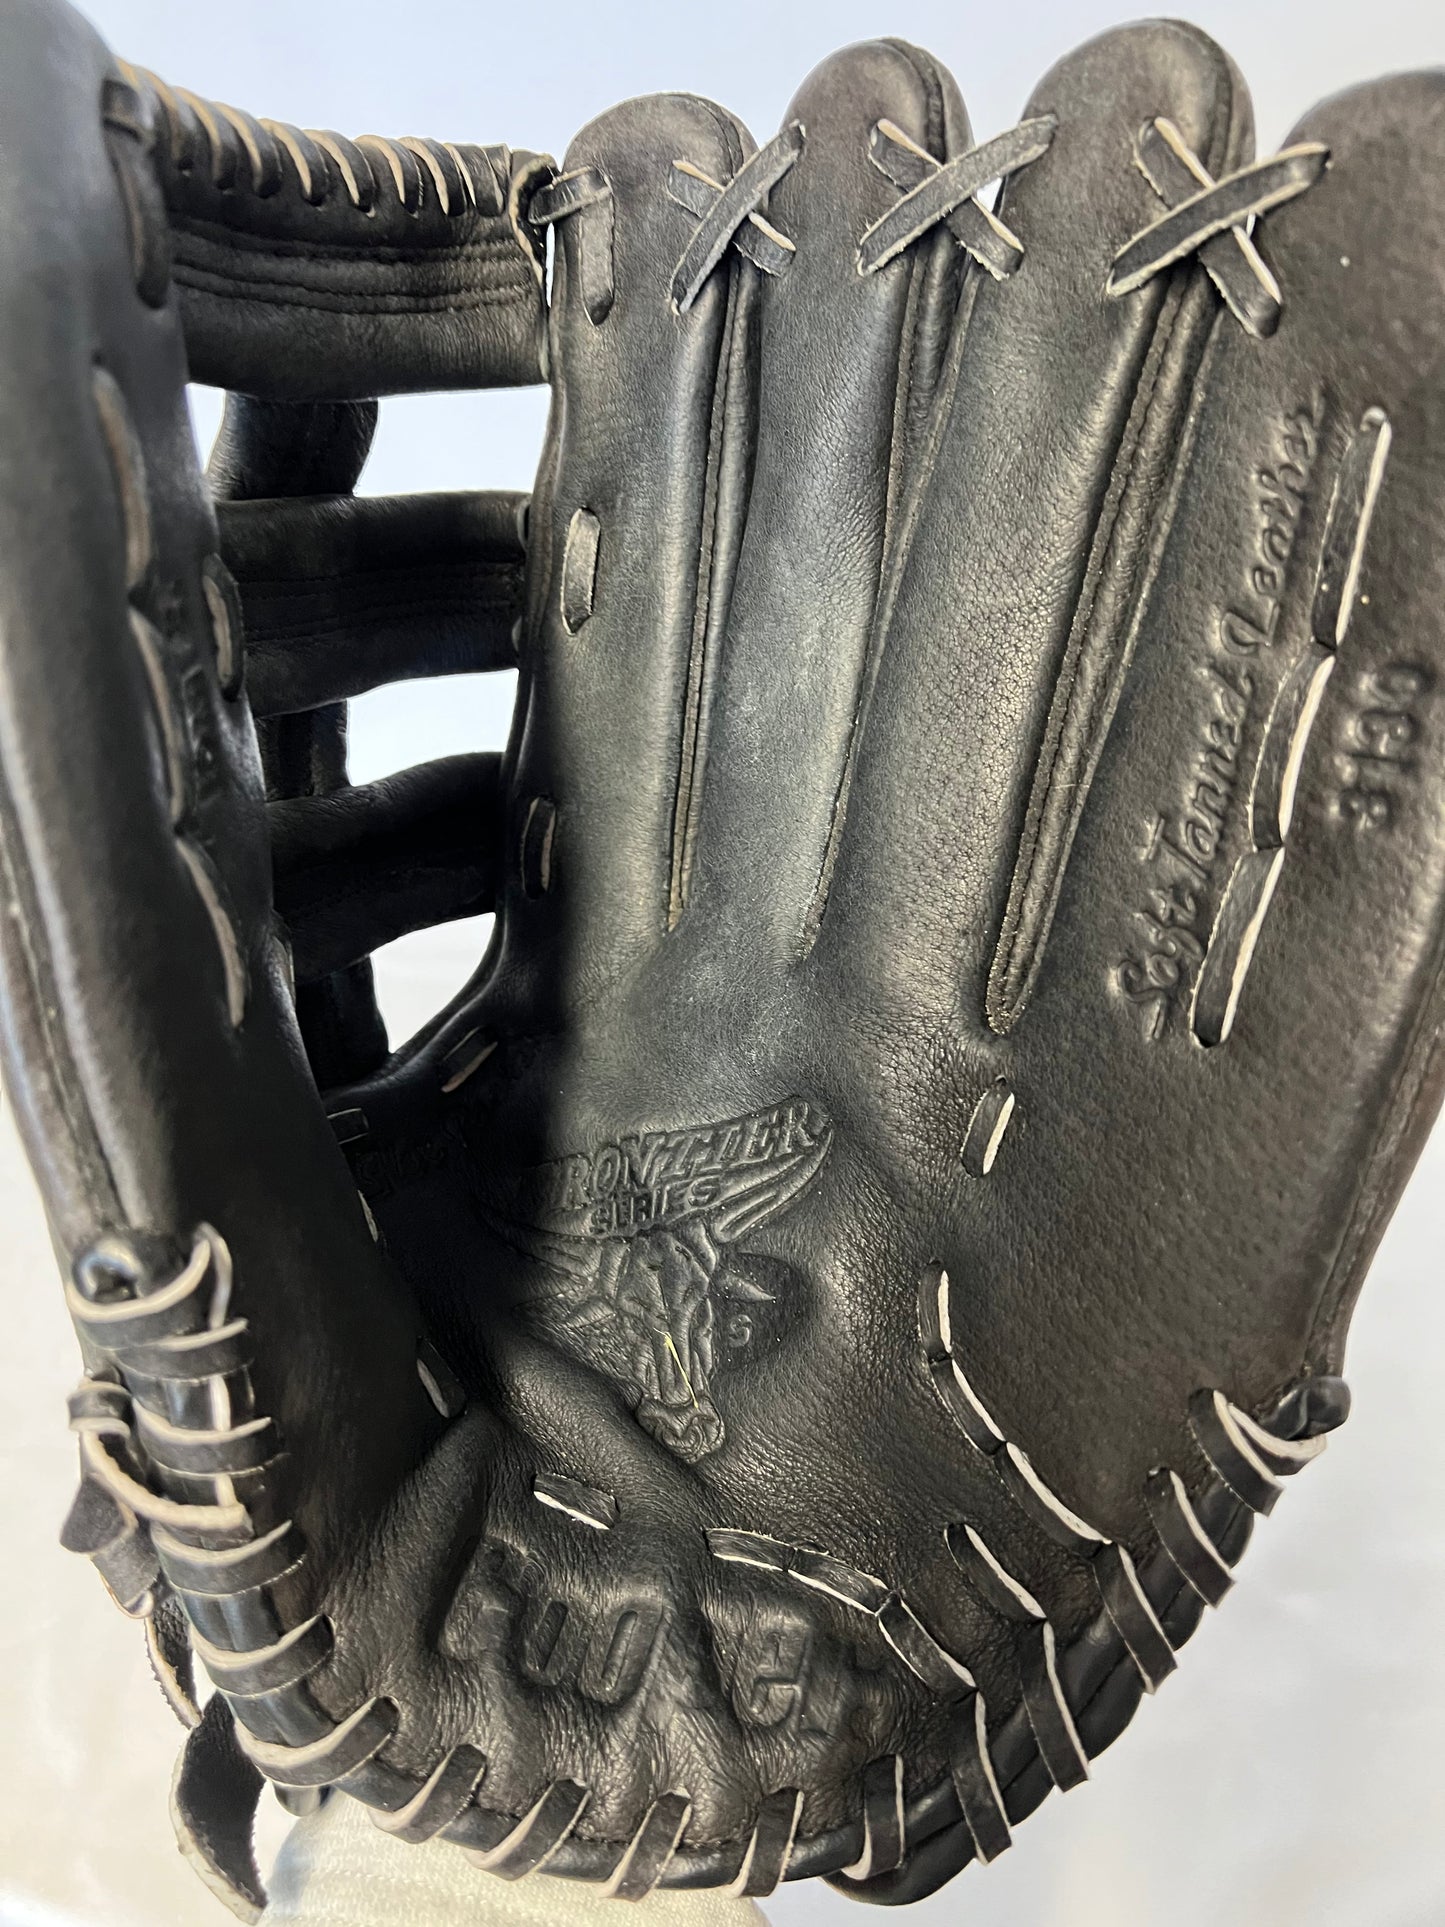 Baseball Glove Adult Size 13 inch Cooper Black Leather Fits On Left Hand As New Excellent Quality